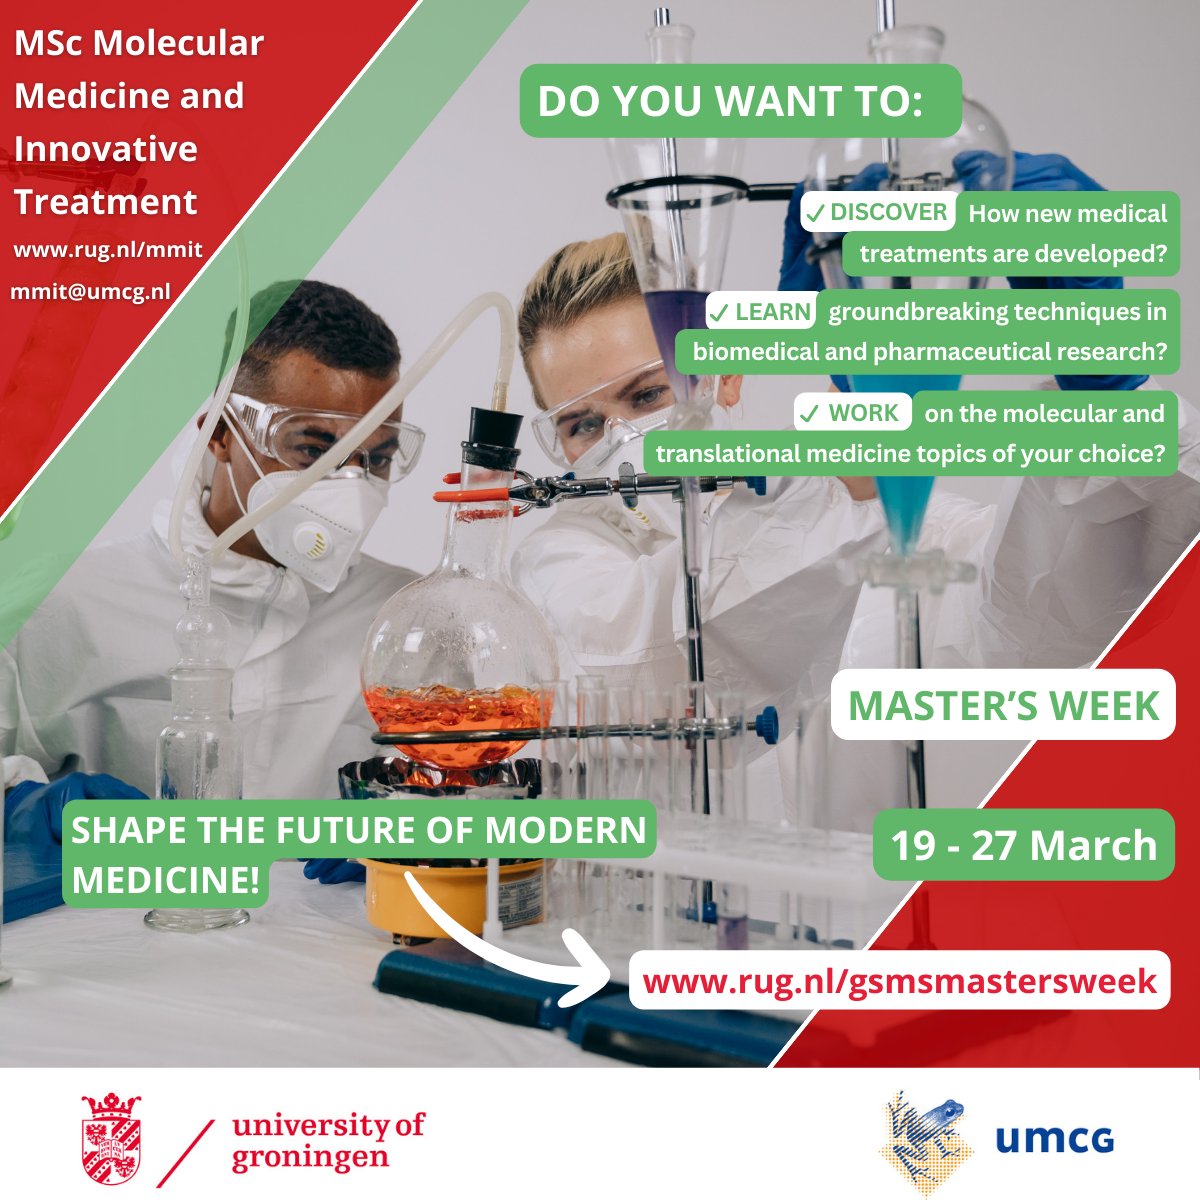 Looking for a Master’s degree?
 
Interested in developing innovative medical treatments? Learning groundbreaking techniques in biomedical and pharmaceutical research? Finding ways to prevent, treat and manage diseases?
 
Join our teachers, students and alumni for Master's Week!